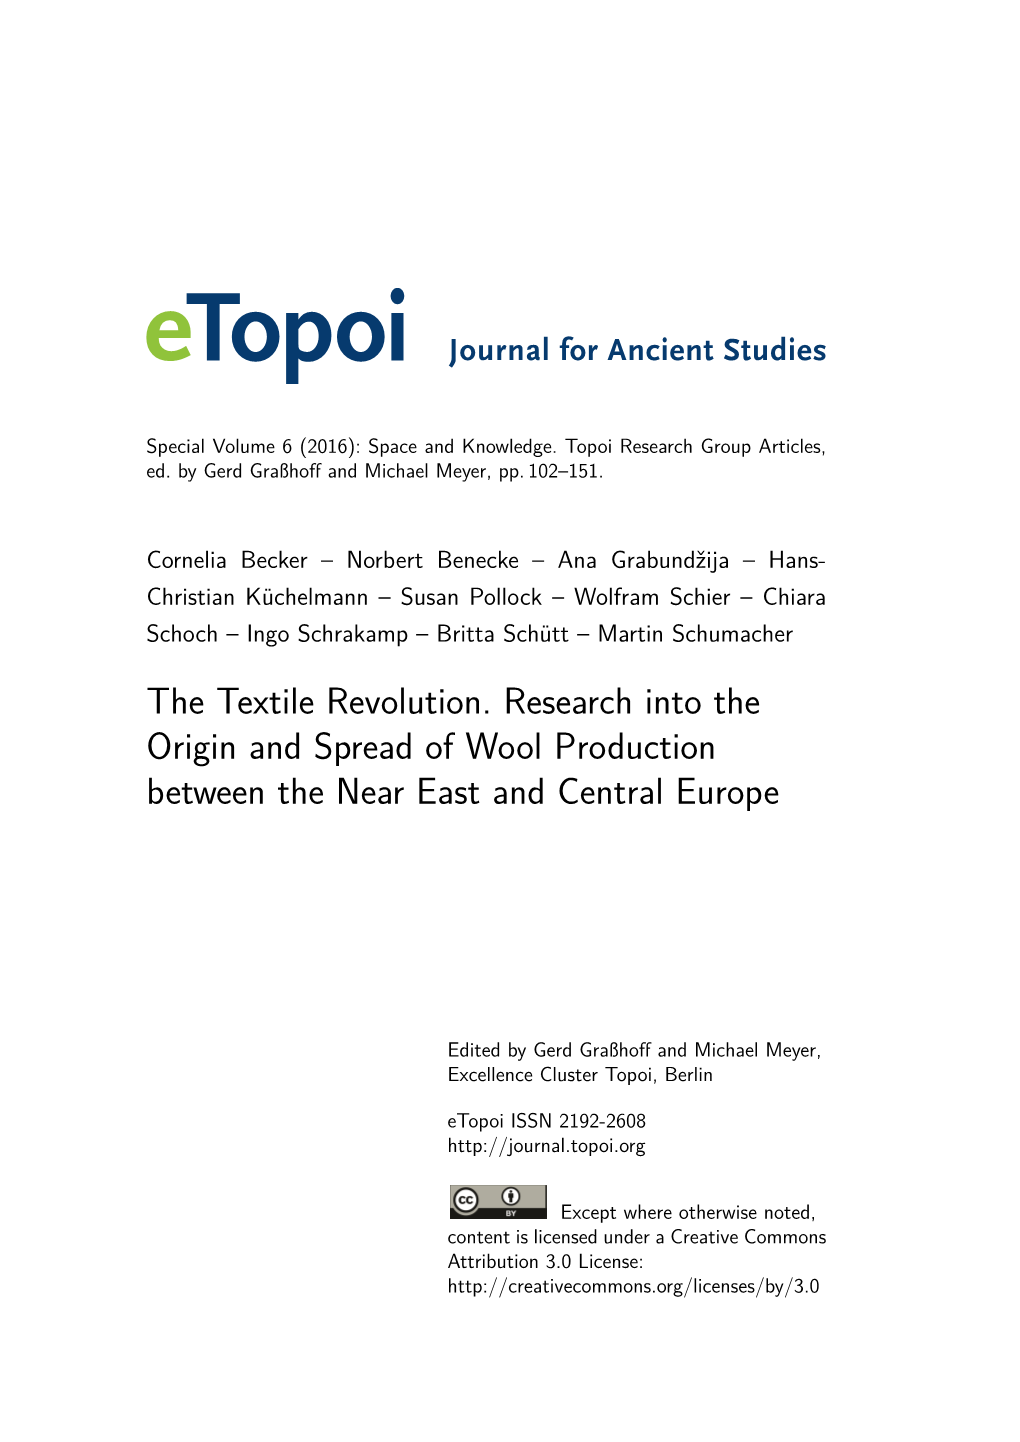 The Textile Revolution. Research Into the Origin and Spread of Wool Production Between the Near East and Central Europe